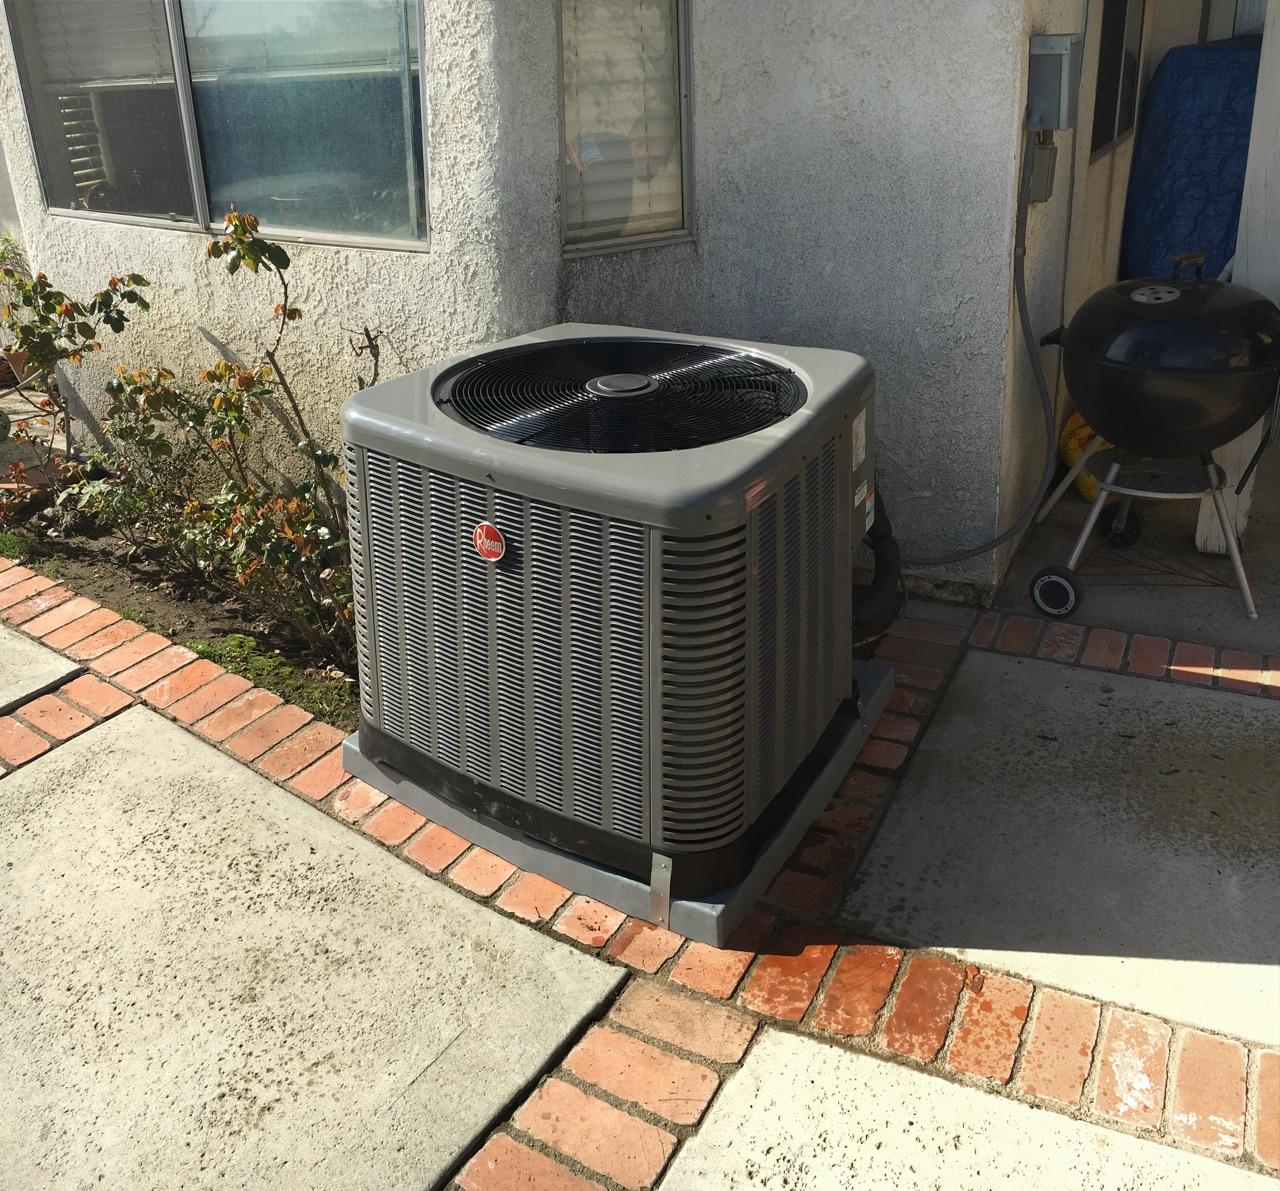 What Causes An Air Conditioner To Ice Up?